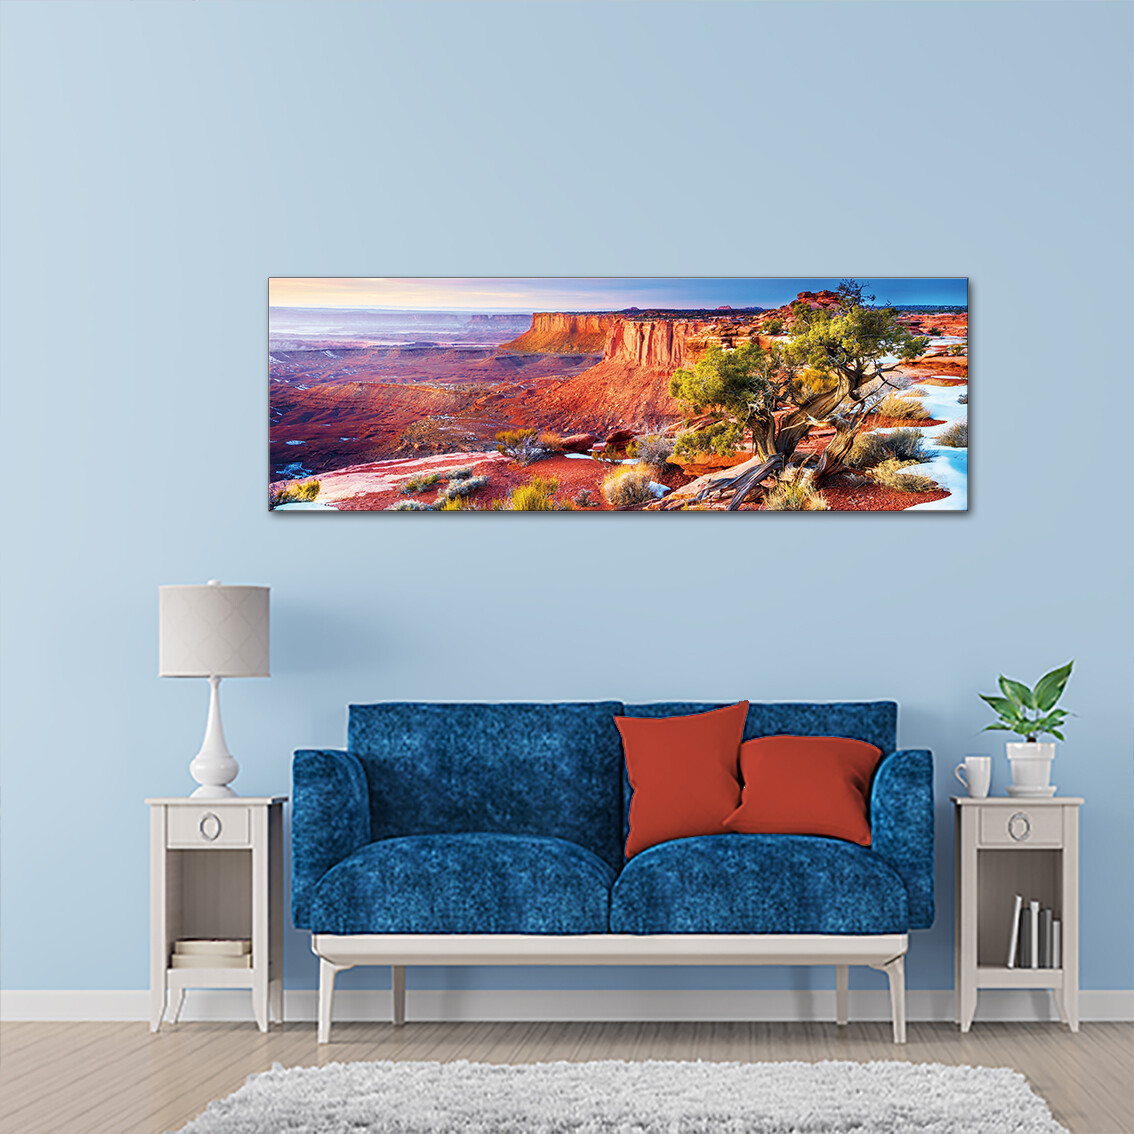 Canyonlands Utah - Modern Luxury Wall art Printed on Acrylic Glass - Frameless and Ready to Hang